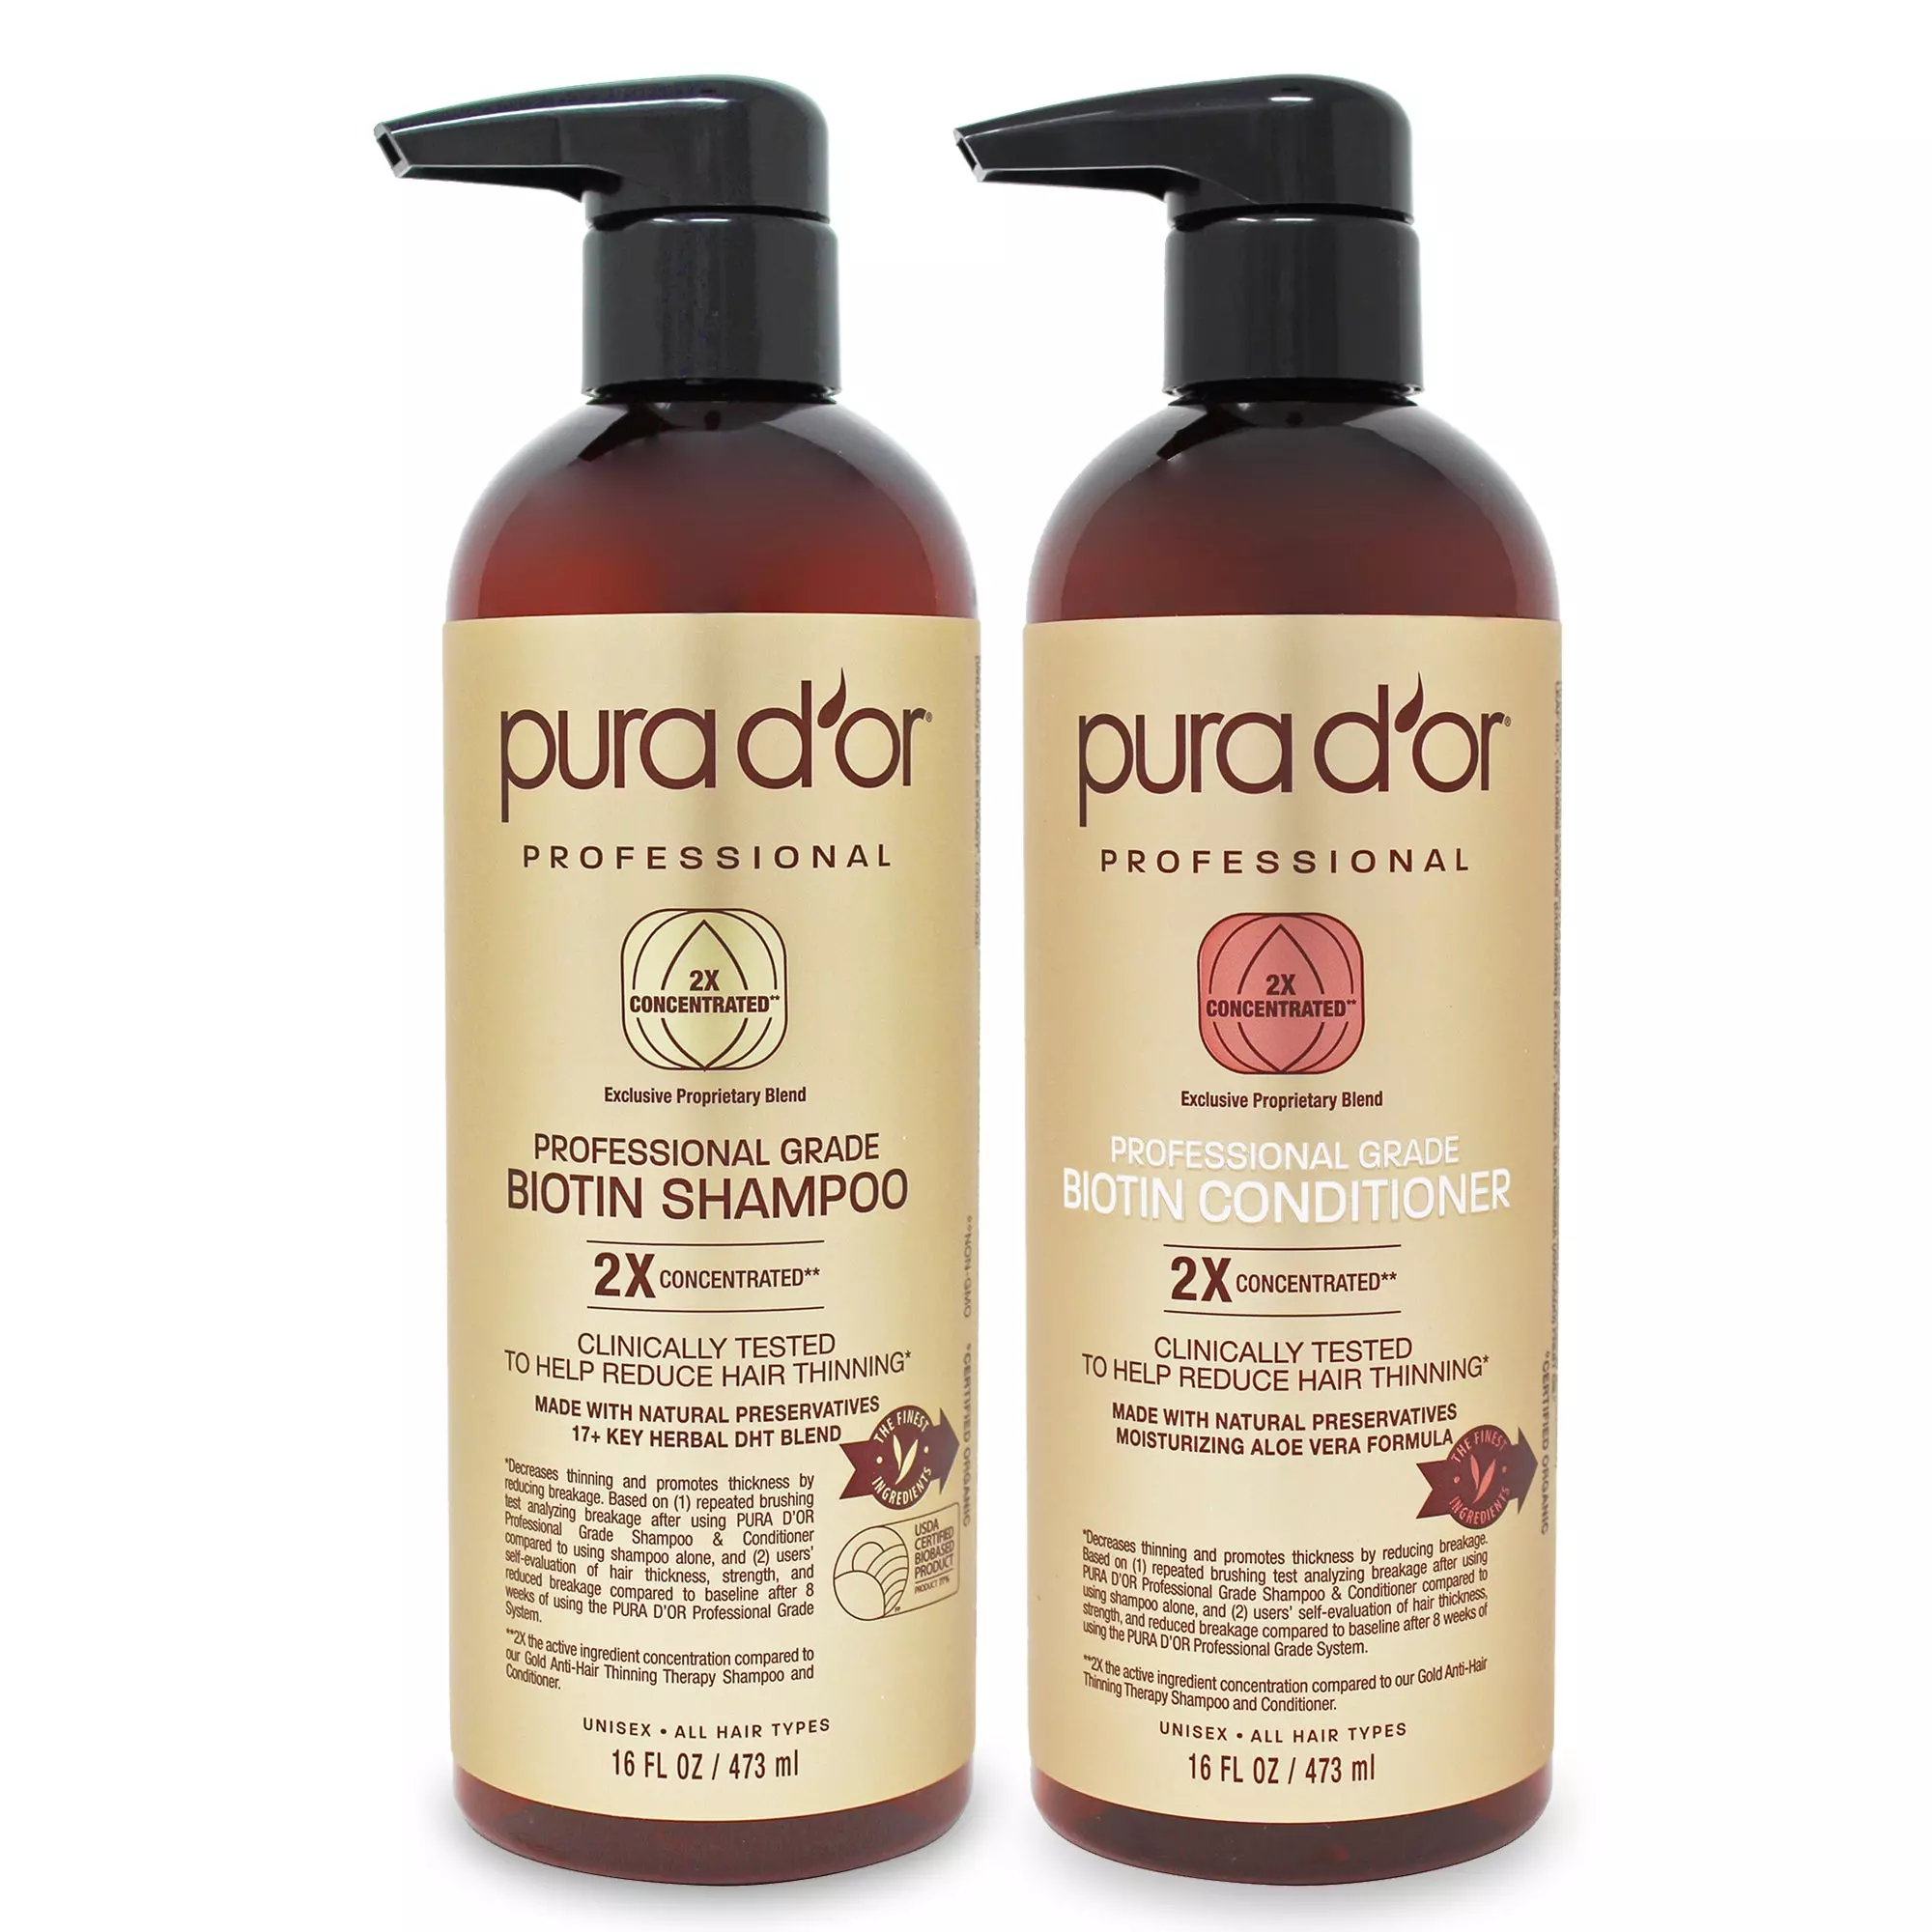 PURA D'OR Anti-Thinning Professional Grade Biotin Shampoo & Conditioner Set, Clinically Proven, 2X Concentrated DHT Blocker Hair Thickening Products For Women & Men, All Natural Shampoo, 16oz x 2